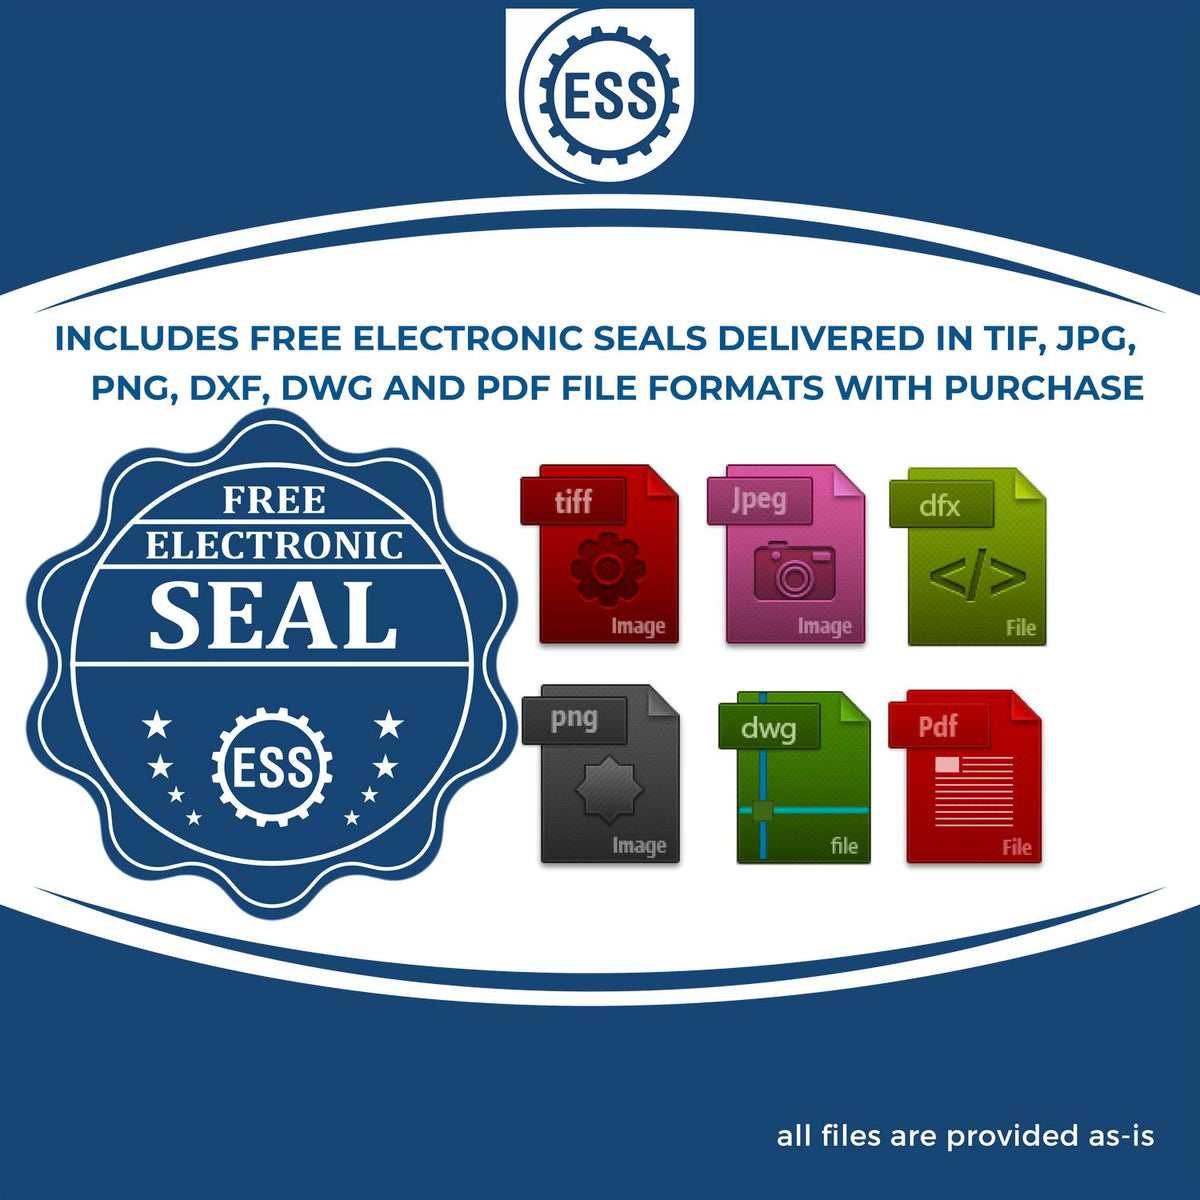 An infographic for the free electronic seal for the Slim Pre-Inked State Seal Notary Stamp for Kentucky illustrating the different file type icons such as DXF, DWG, TIF, JPG and PNG.